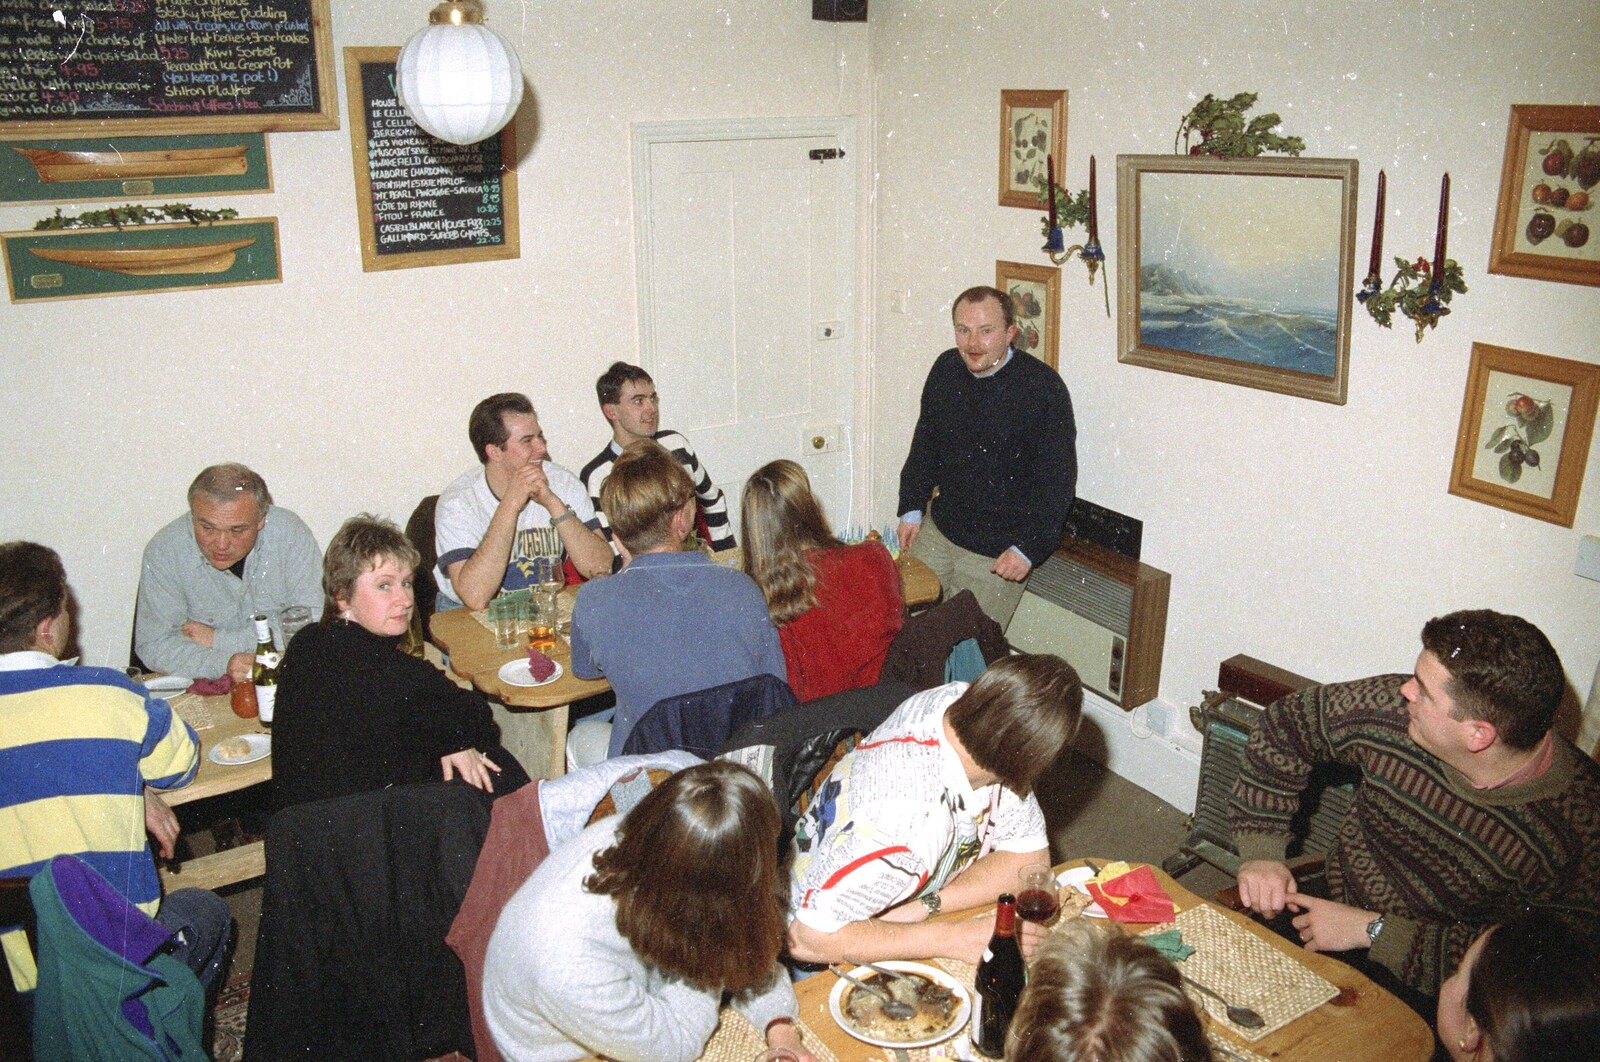 Hamish addresses the room from Hamish's Thirtieth Birthday, Hare and Hounds, Sway, Hampshire - 19th December 1996